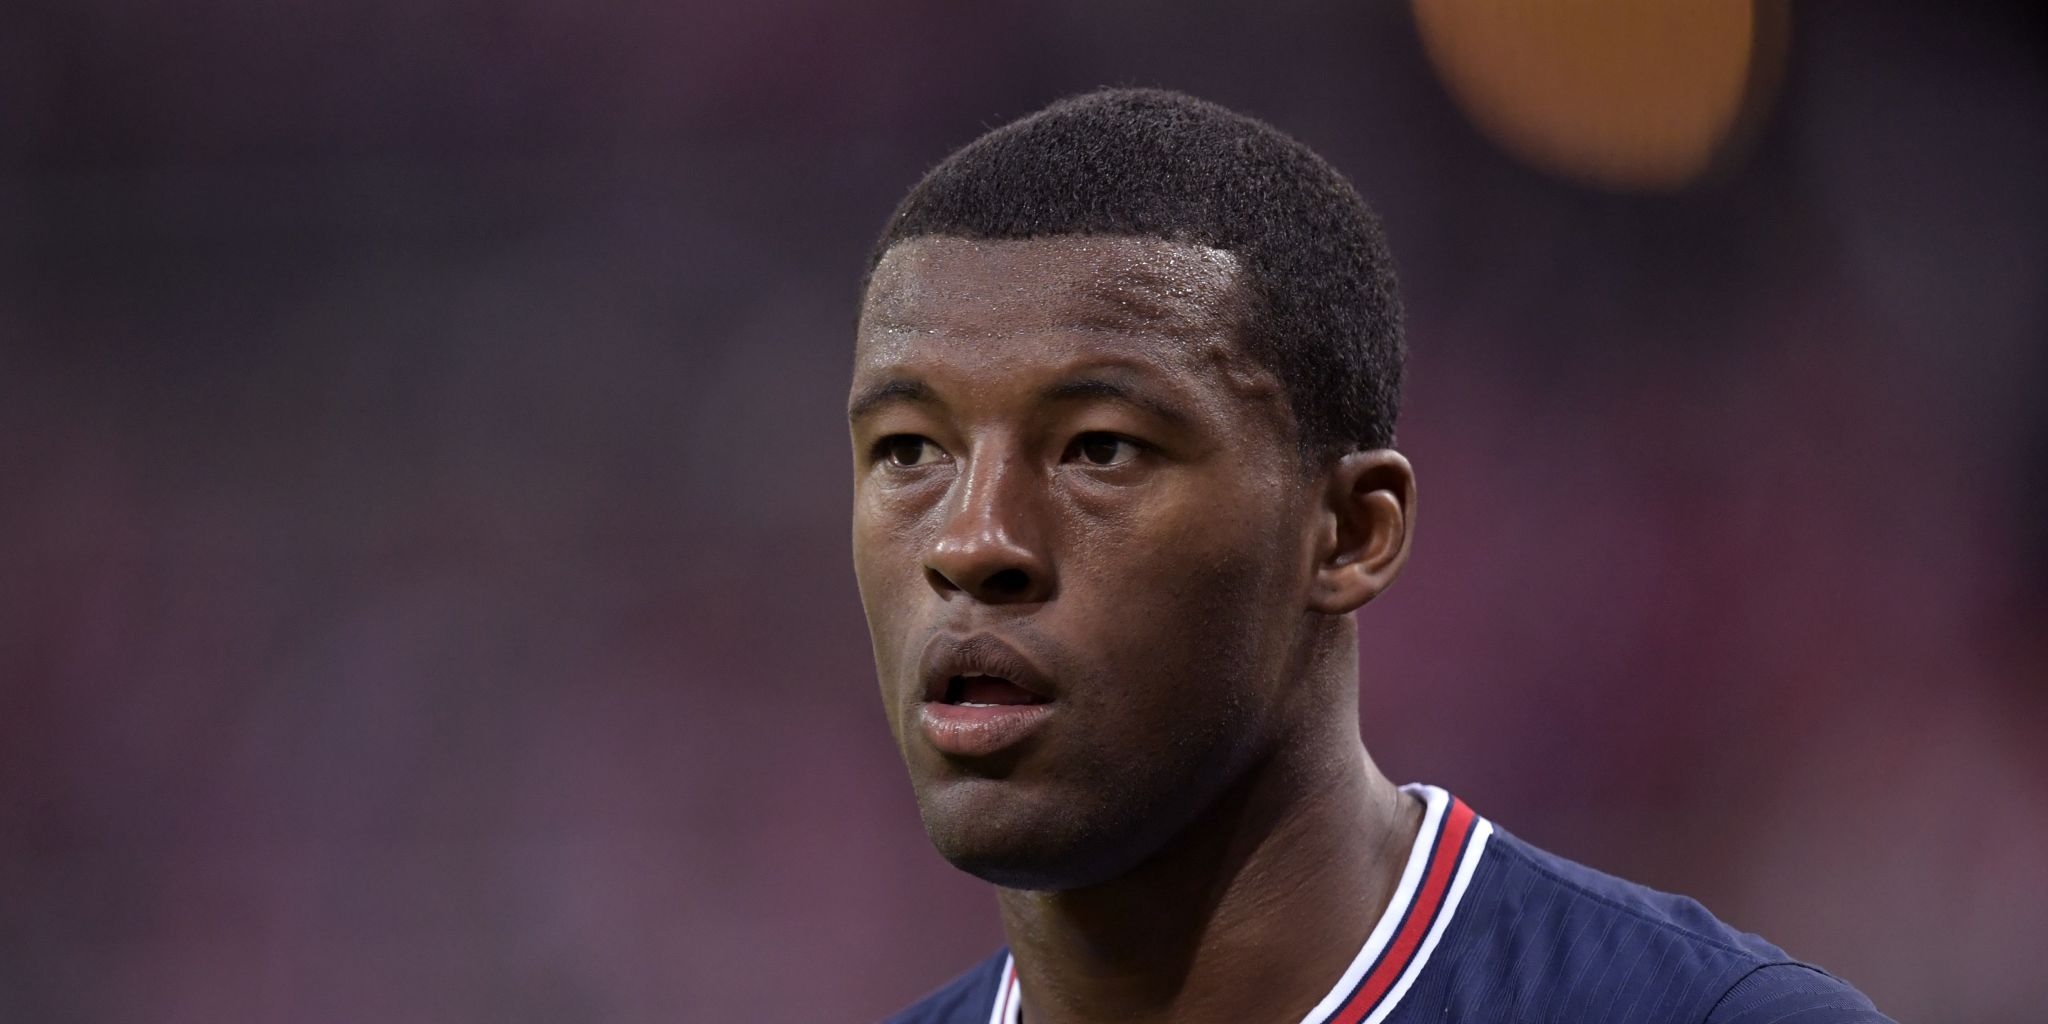 PSG plan early sale of Wijnaldum as part of mass exodus after Madrid humiliation – report